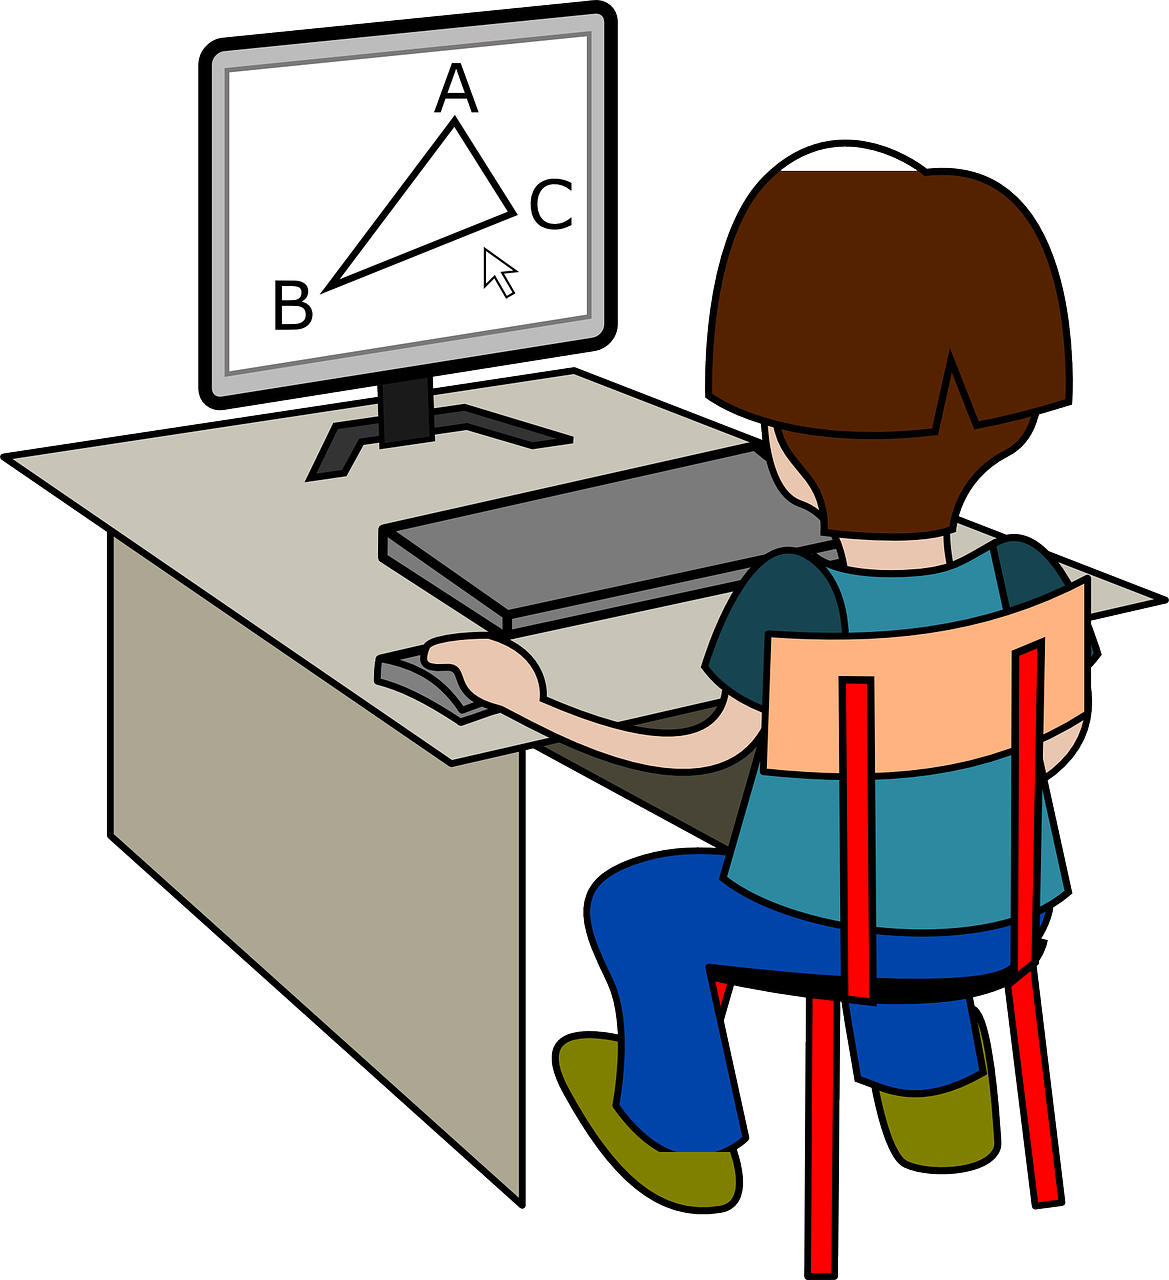 computer research clipart